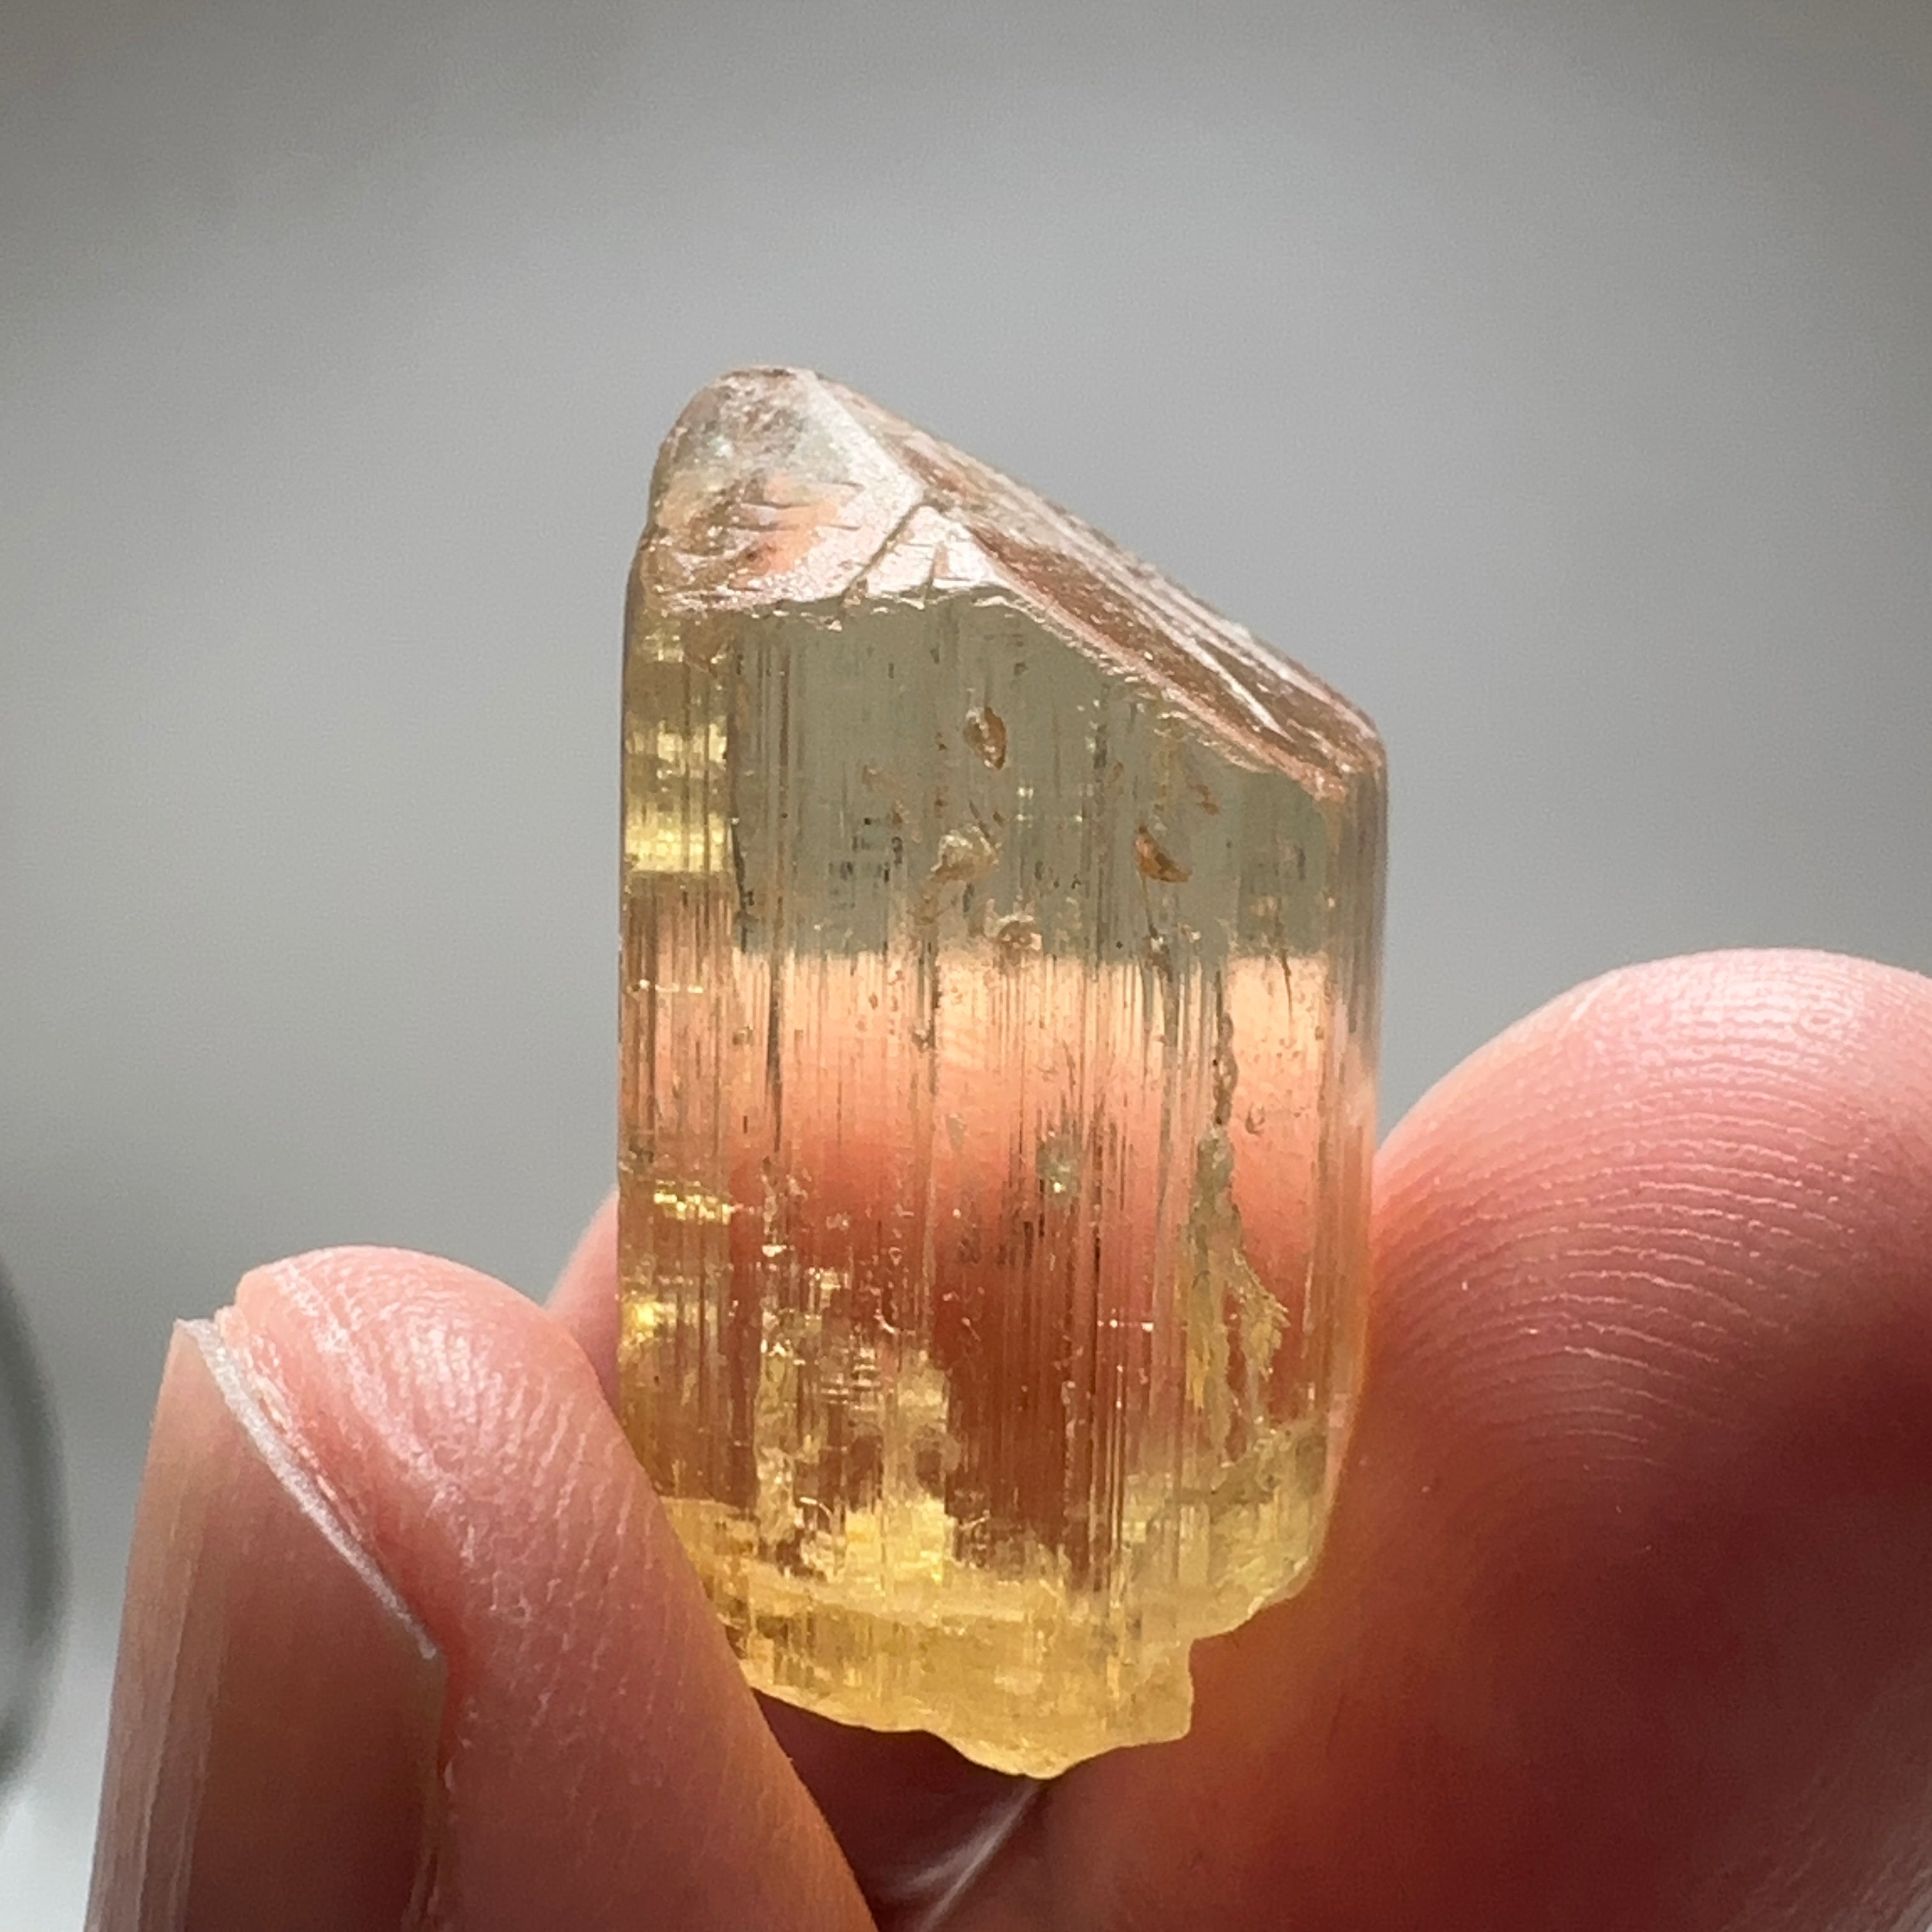 42.29ct Golden Scapolite Crystal, Tanzania, Untreated Unheated